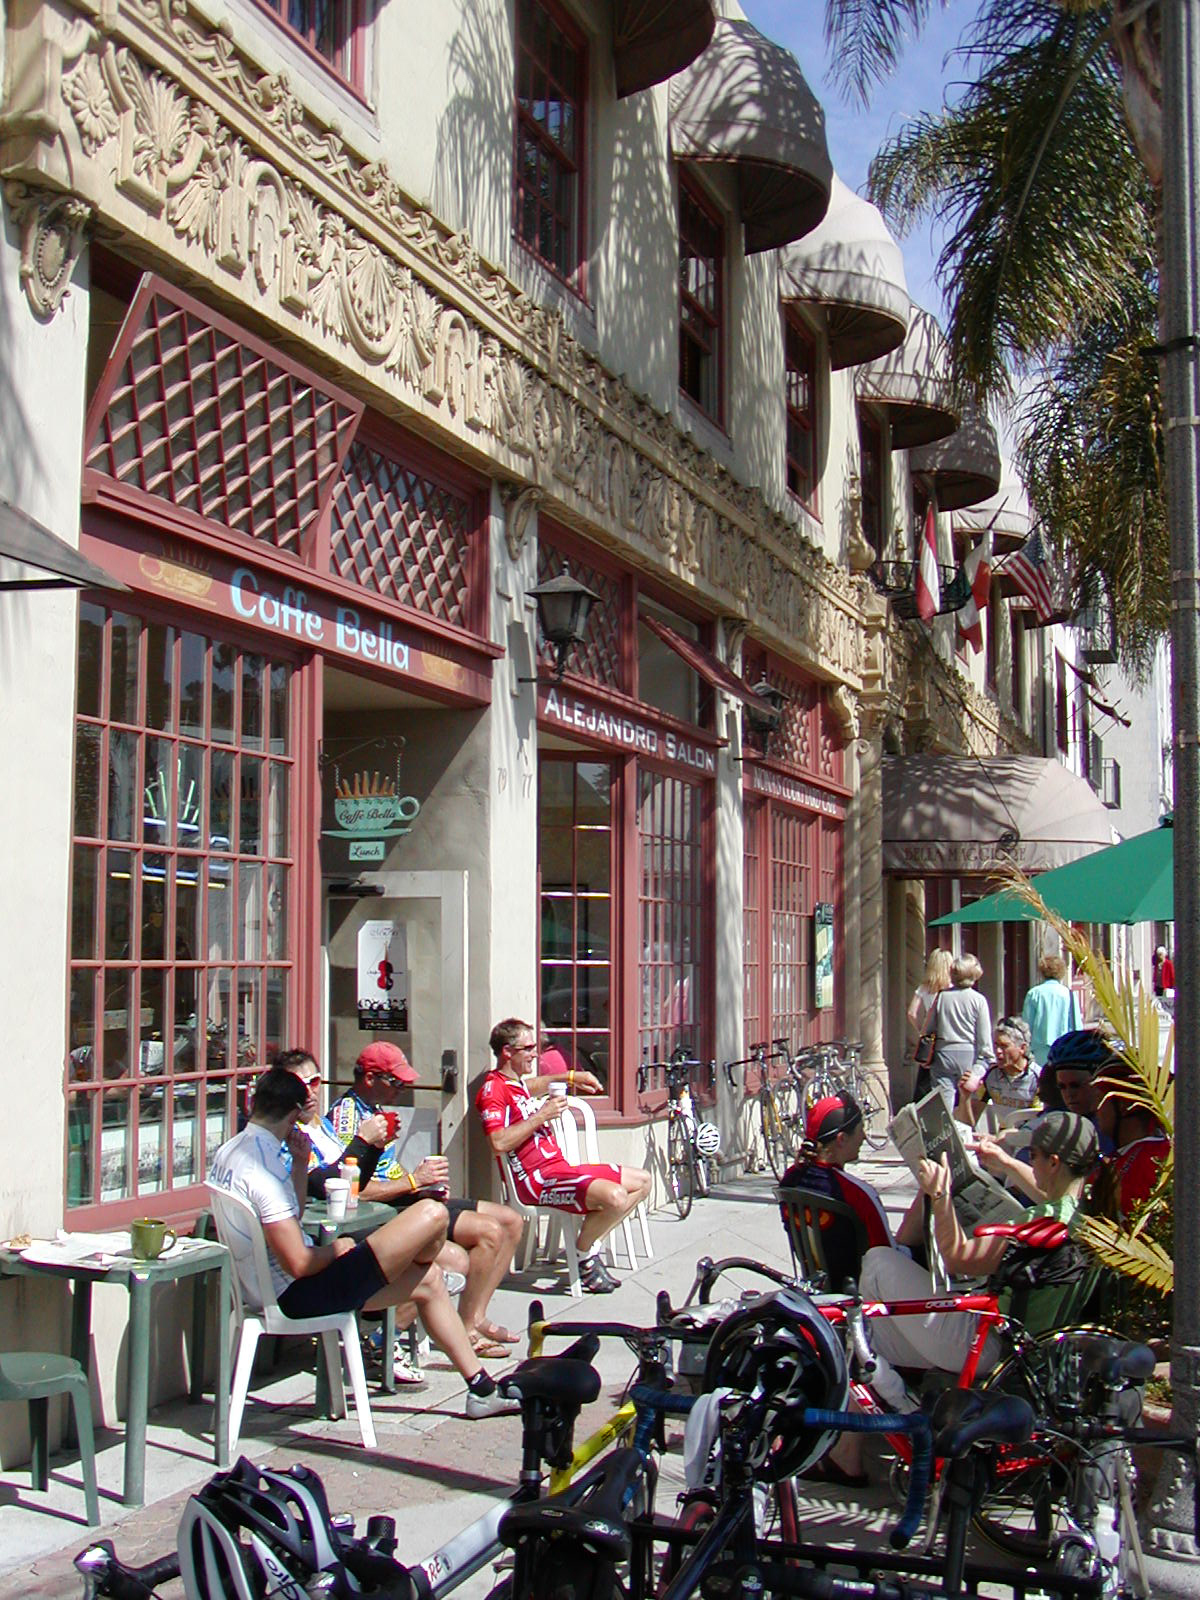 People sitting outside a cafe in downtown Ventura, California